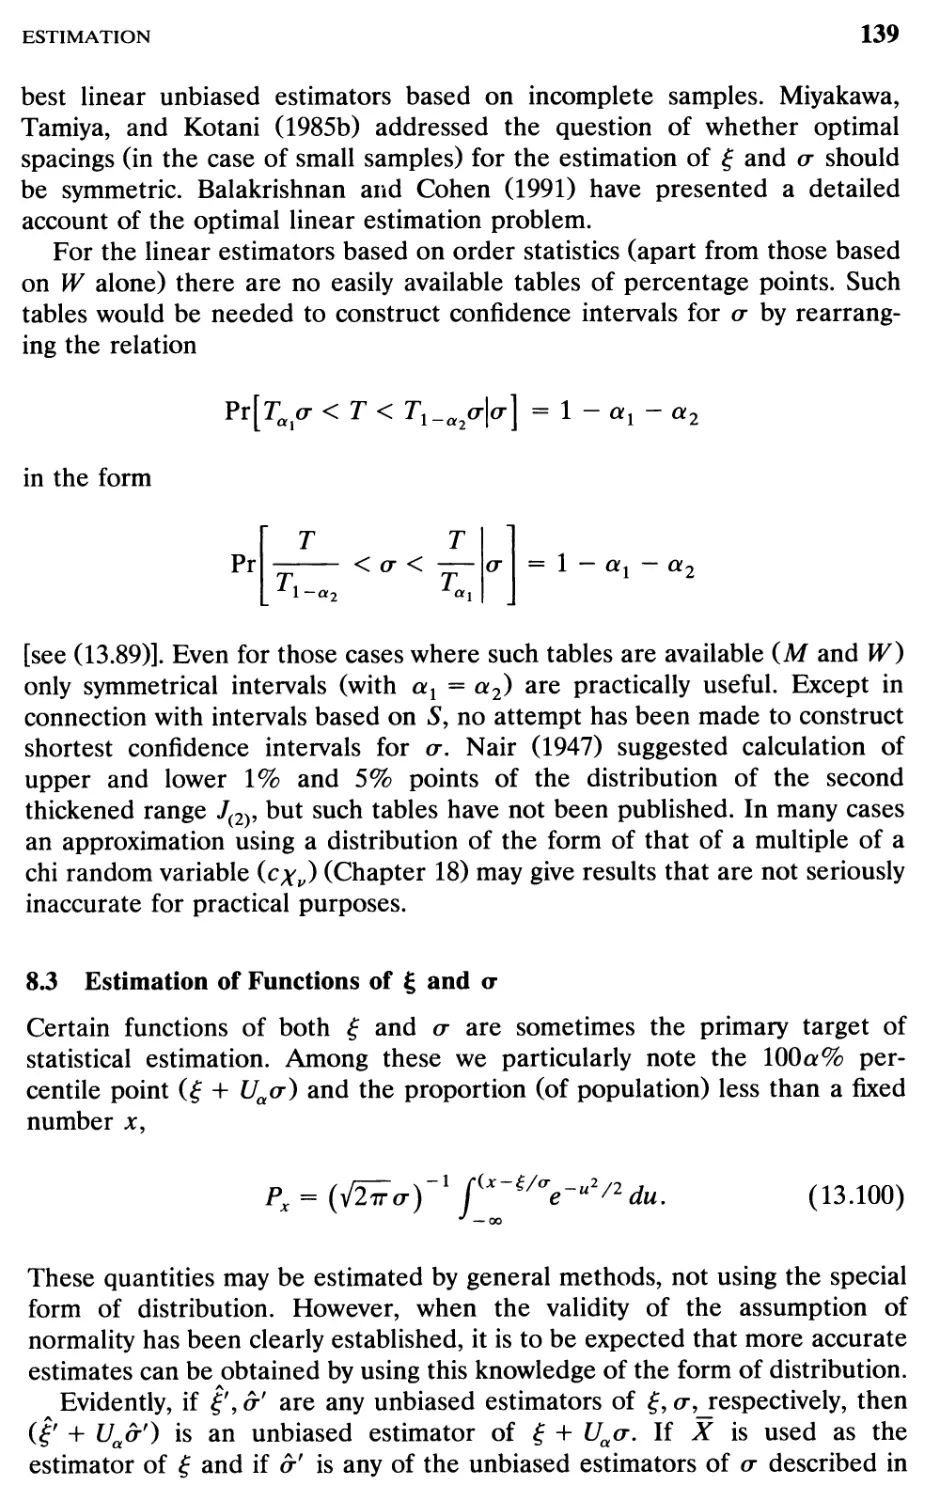 8.3 Estimation of Functions of ? and a, 139